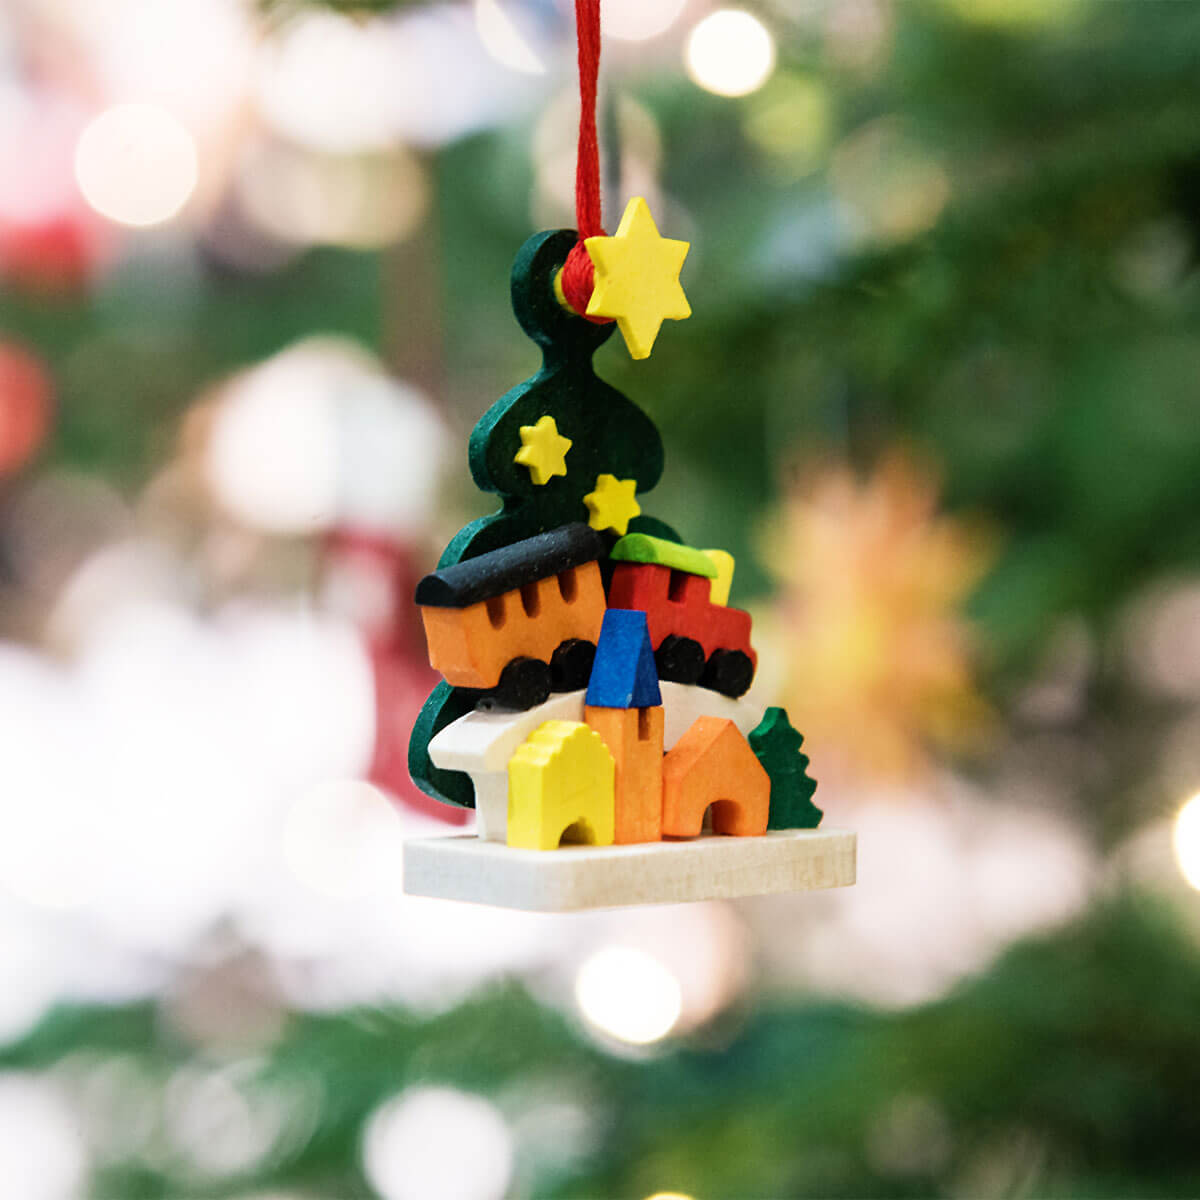 Christmas Tree & Gifts Ornament with bird house